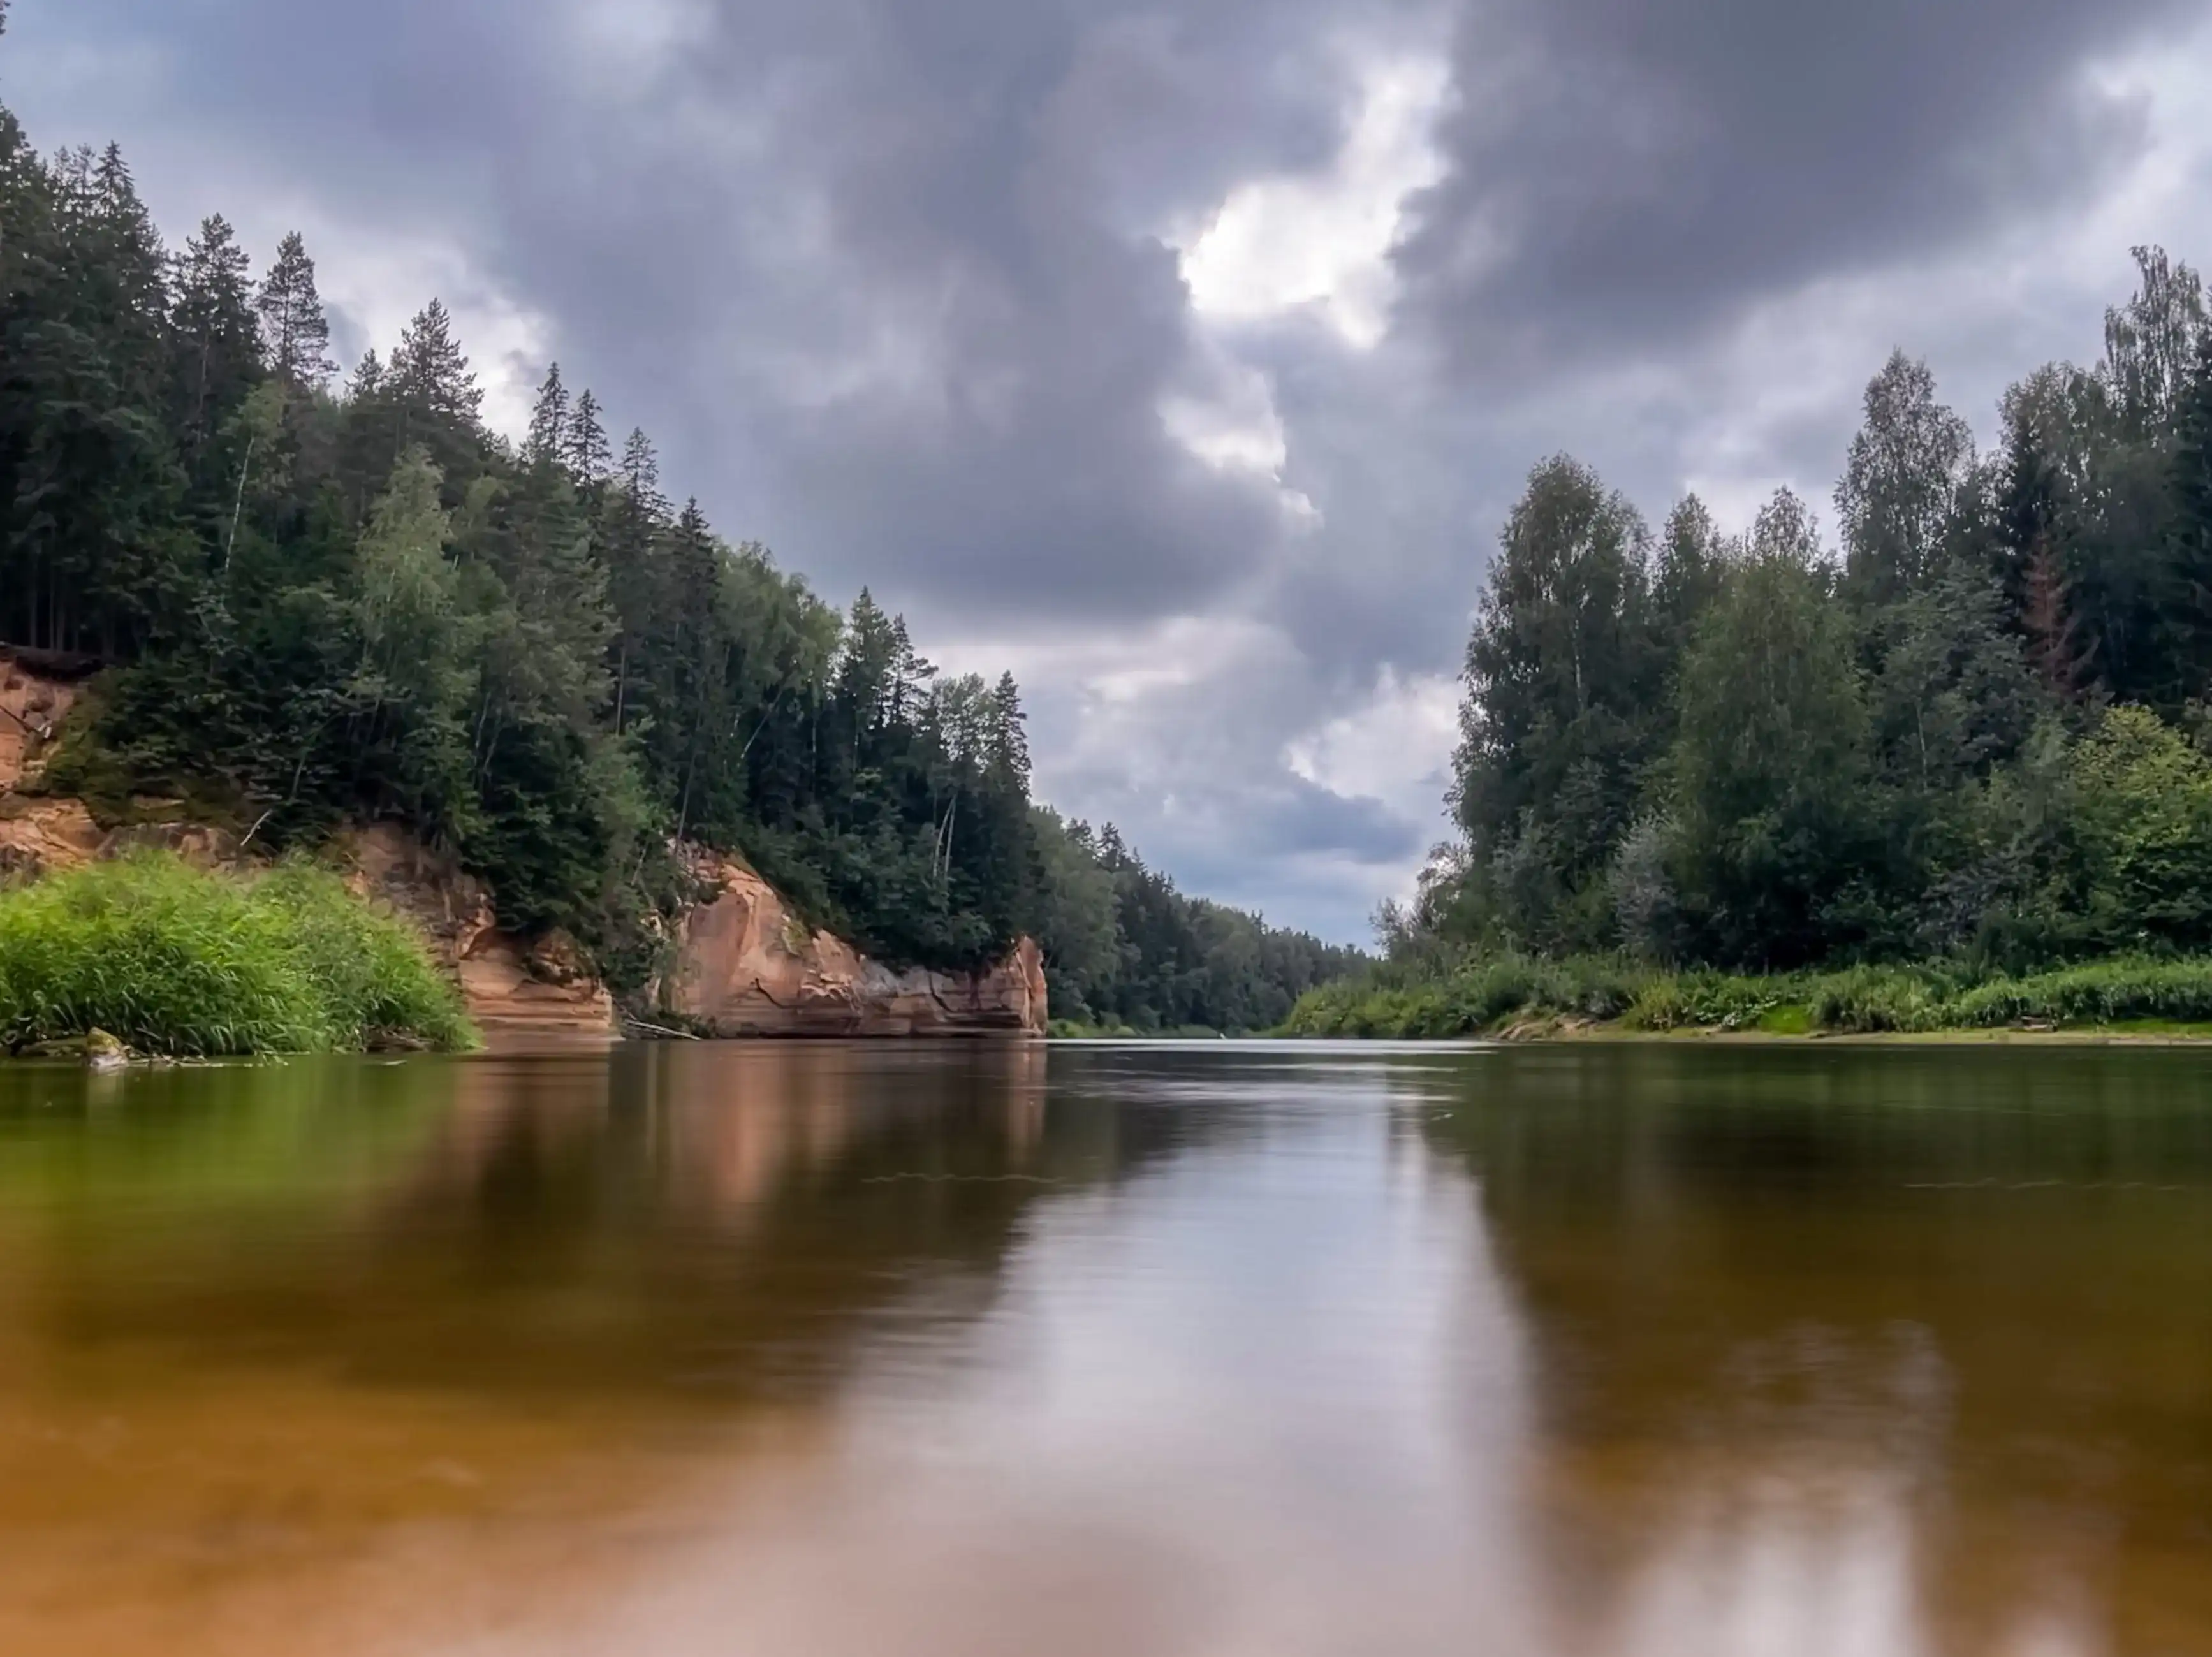 A tranquil river gracefully winds its way through a serene forest, its mirror-like surface reflecting the lush beauty of the surrounding woods. Erglu Klintis, Cesu novads, Latvija, Latvia